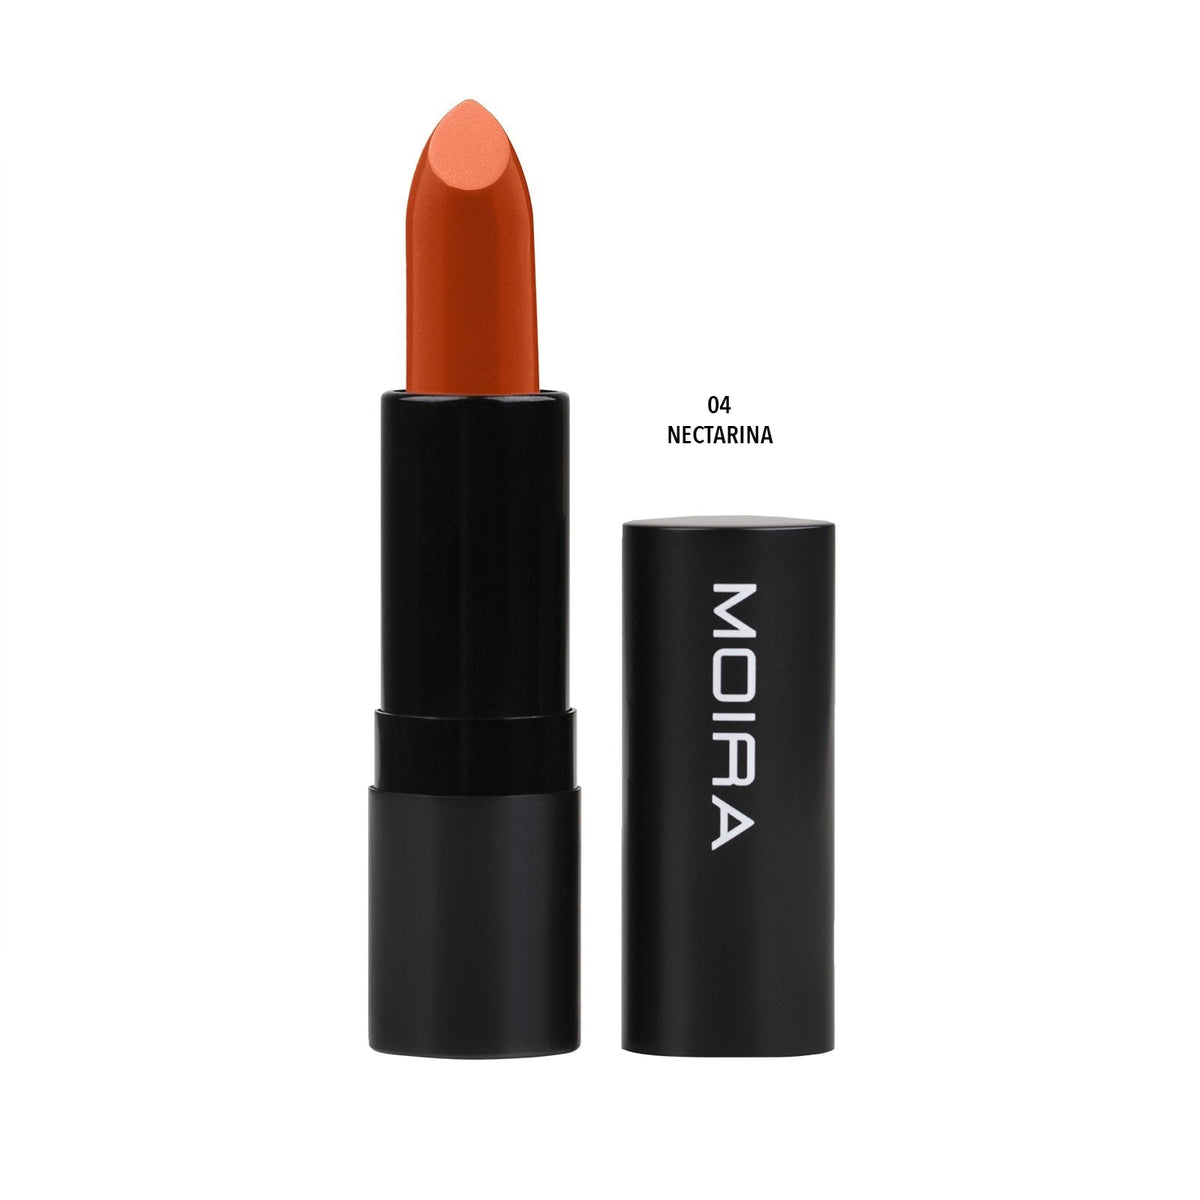 Defiant Lipstick - Nectarina SEXY DRESS OUTLET